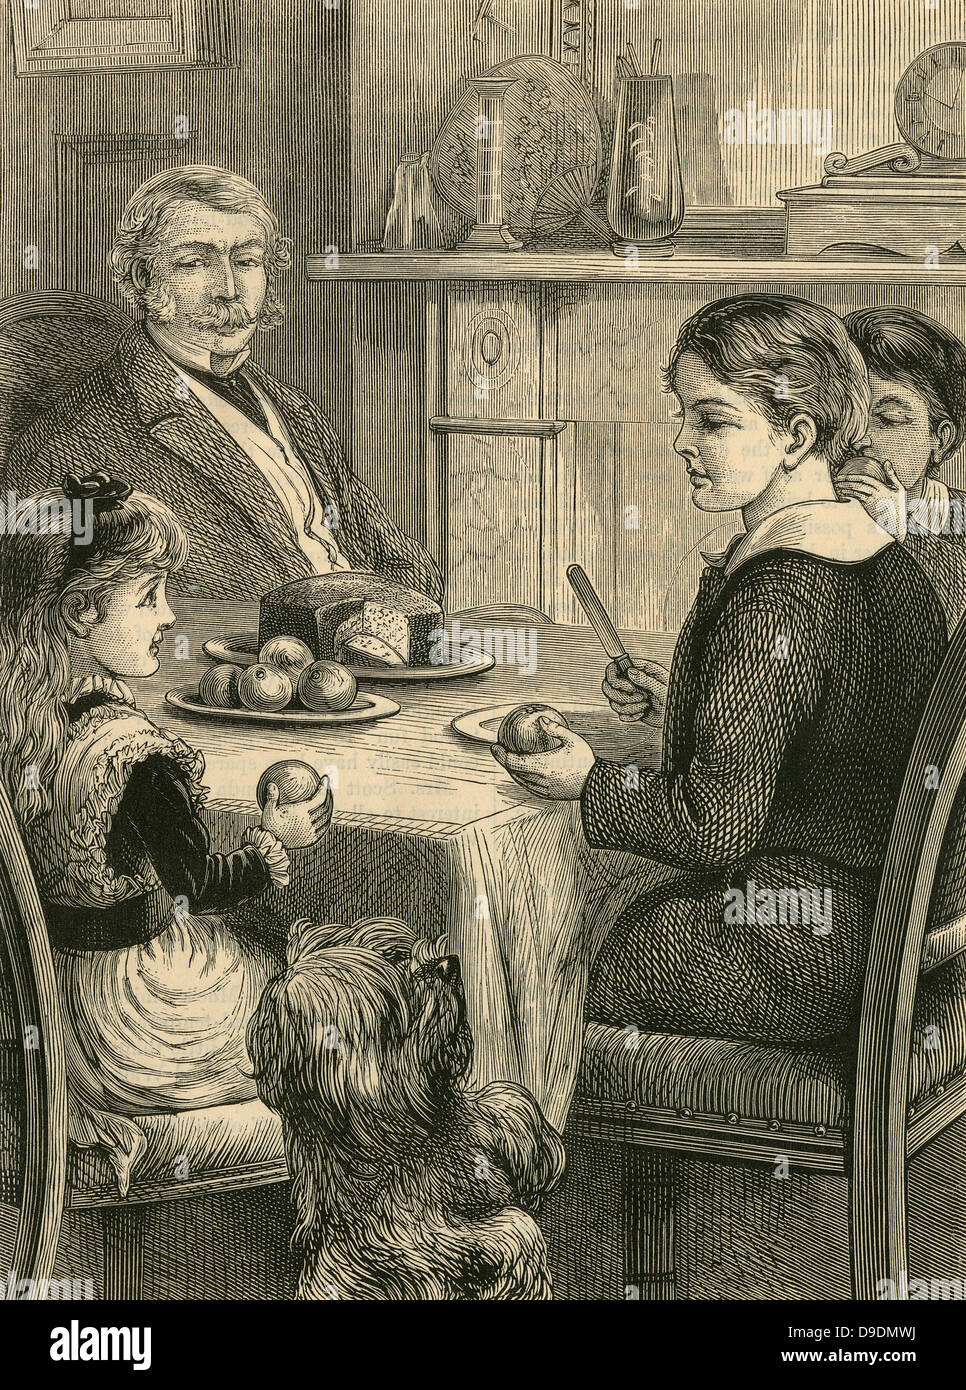 Family tea time: pet dog begging for a treat. Engraving, 1882 Stock Photo